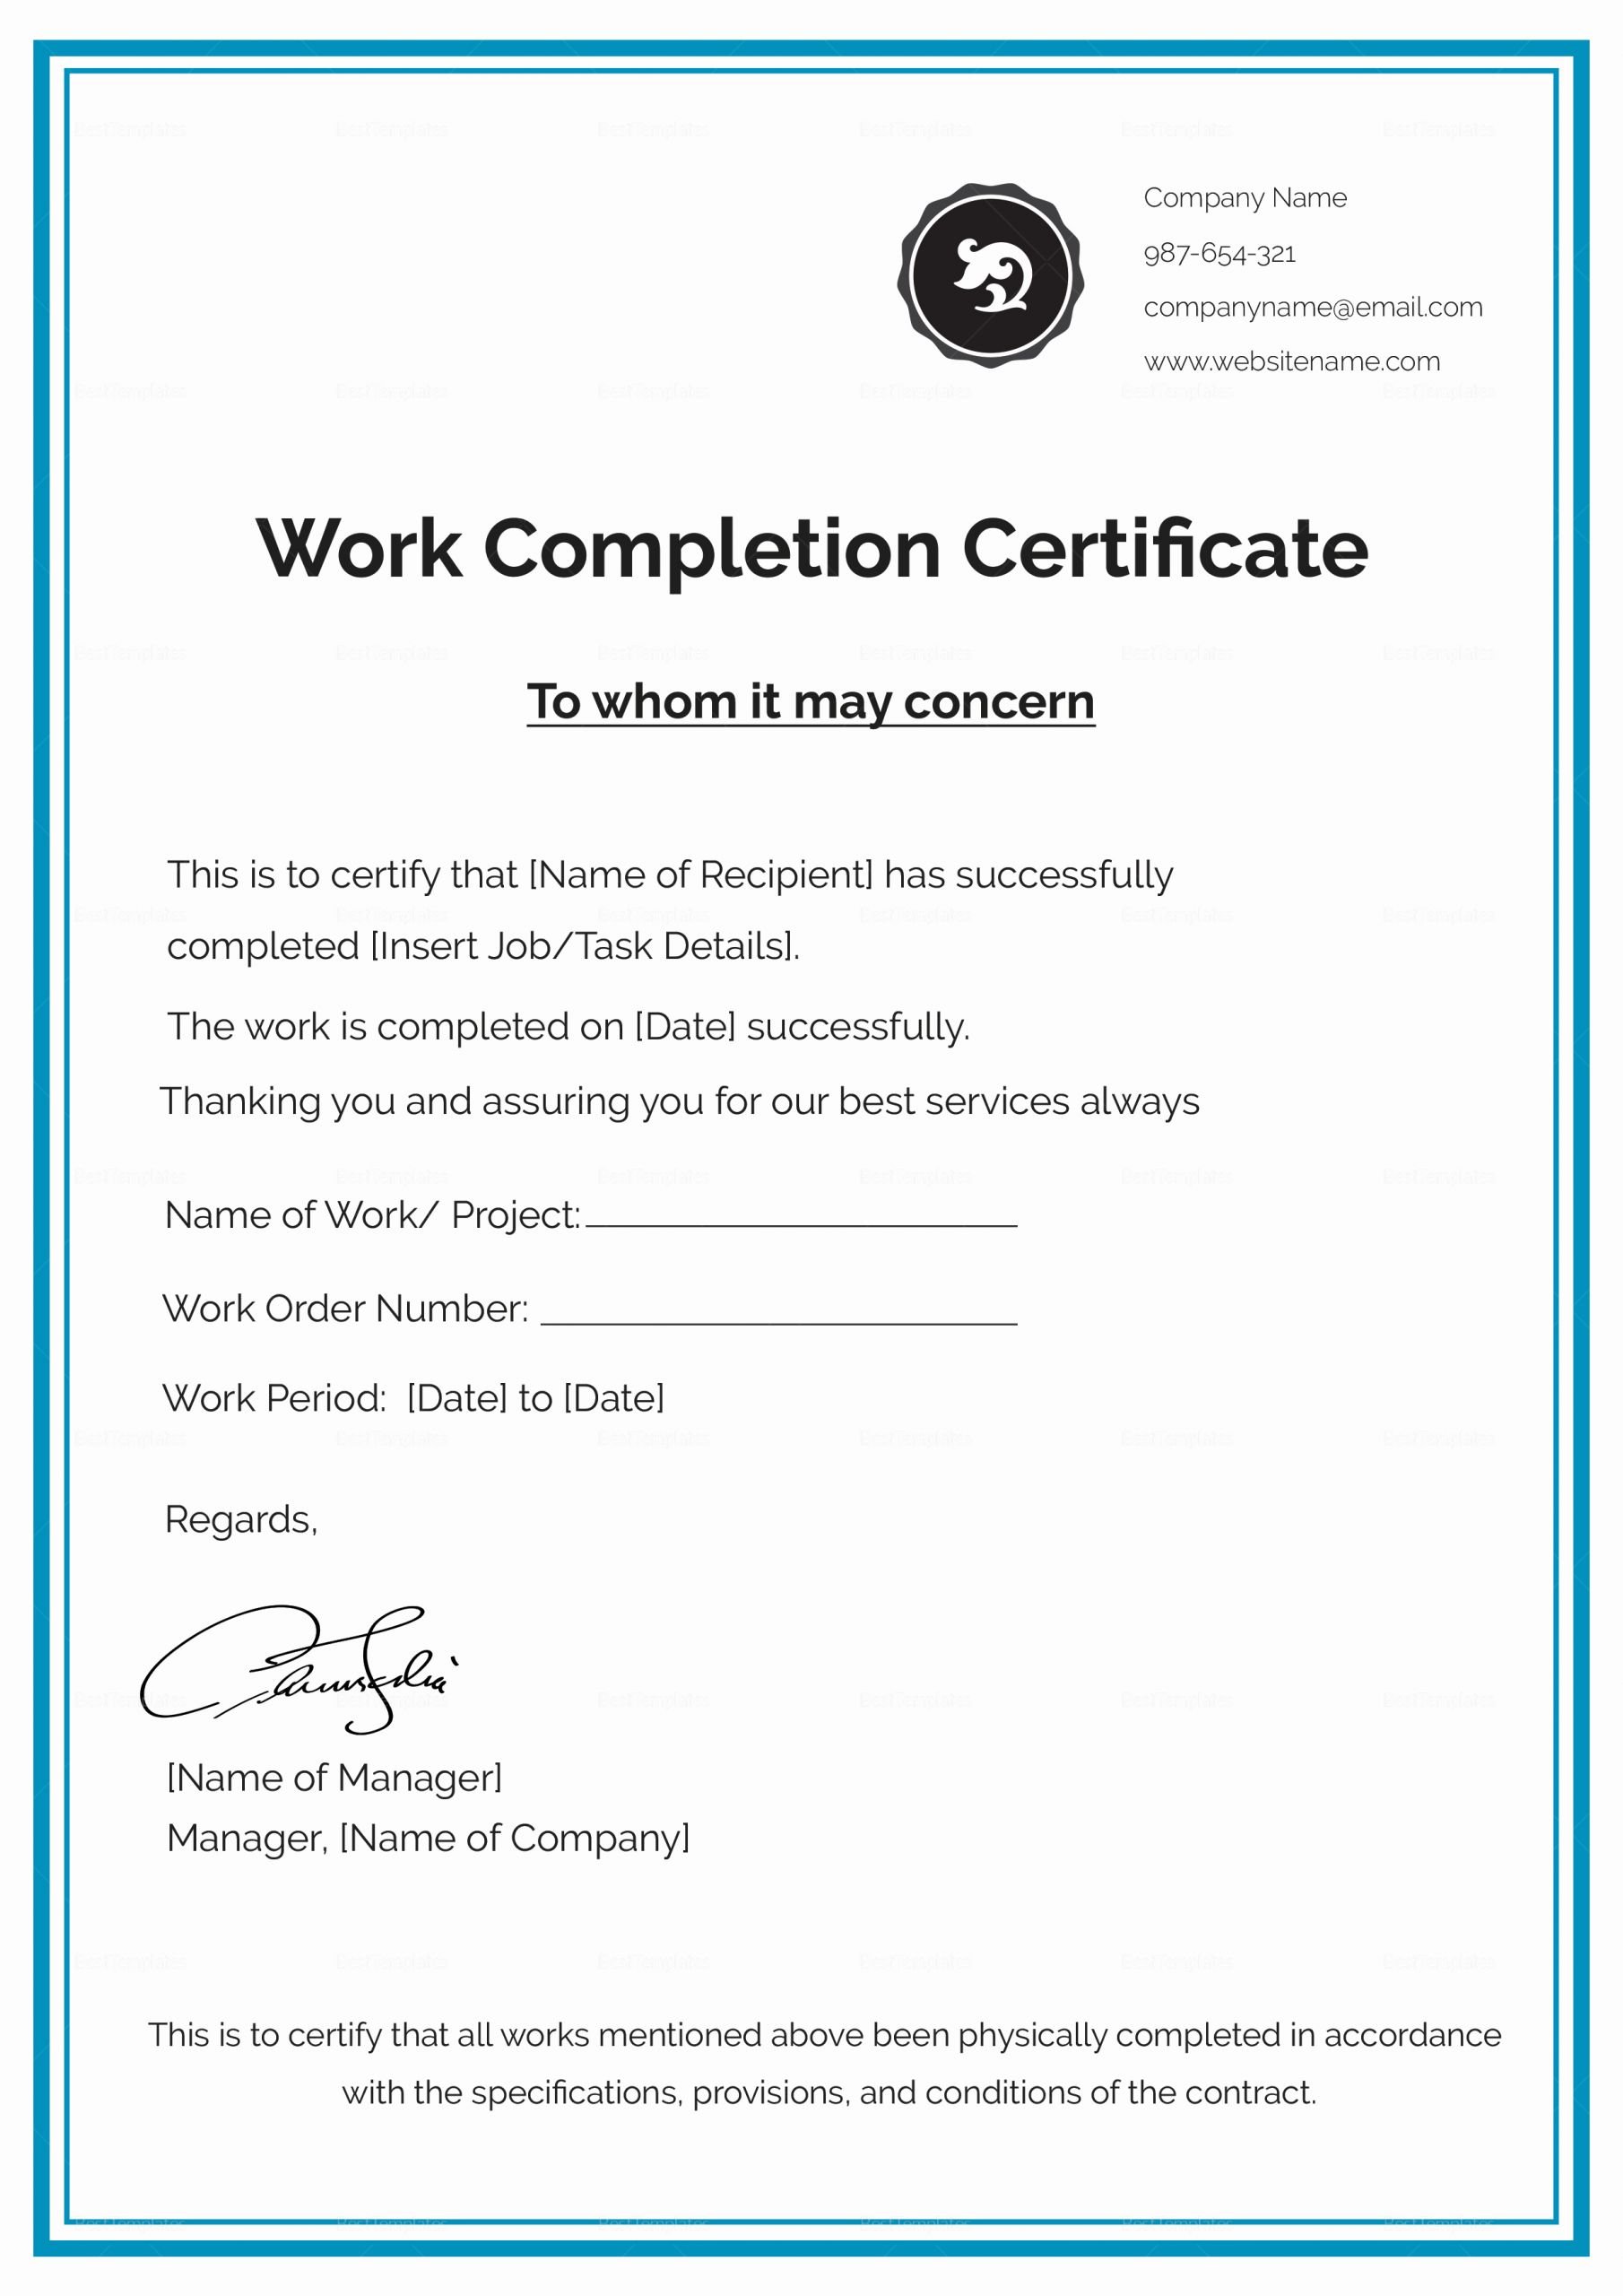 Roofing Certificate Of Completion Template Elegant Work Pletion Certificate Design Template In Psd Word